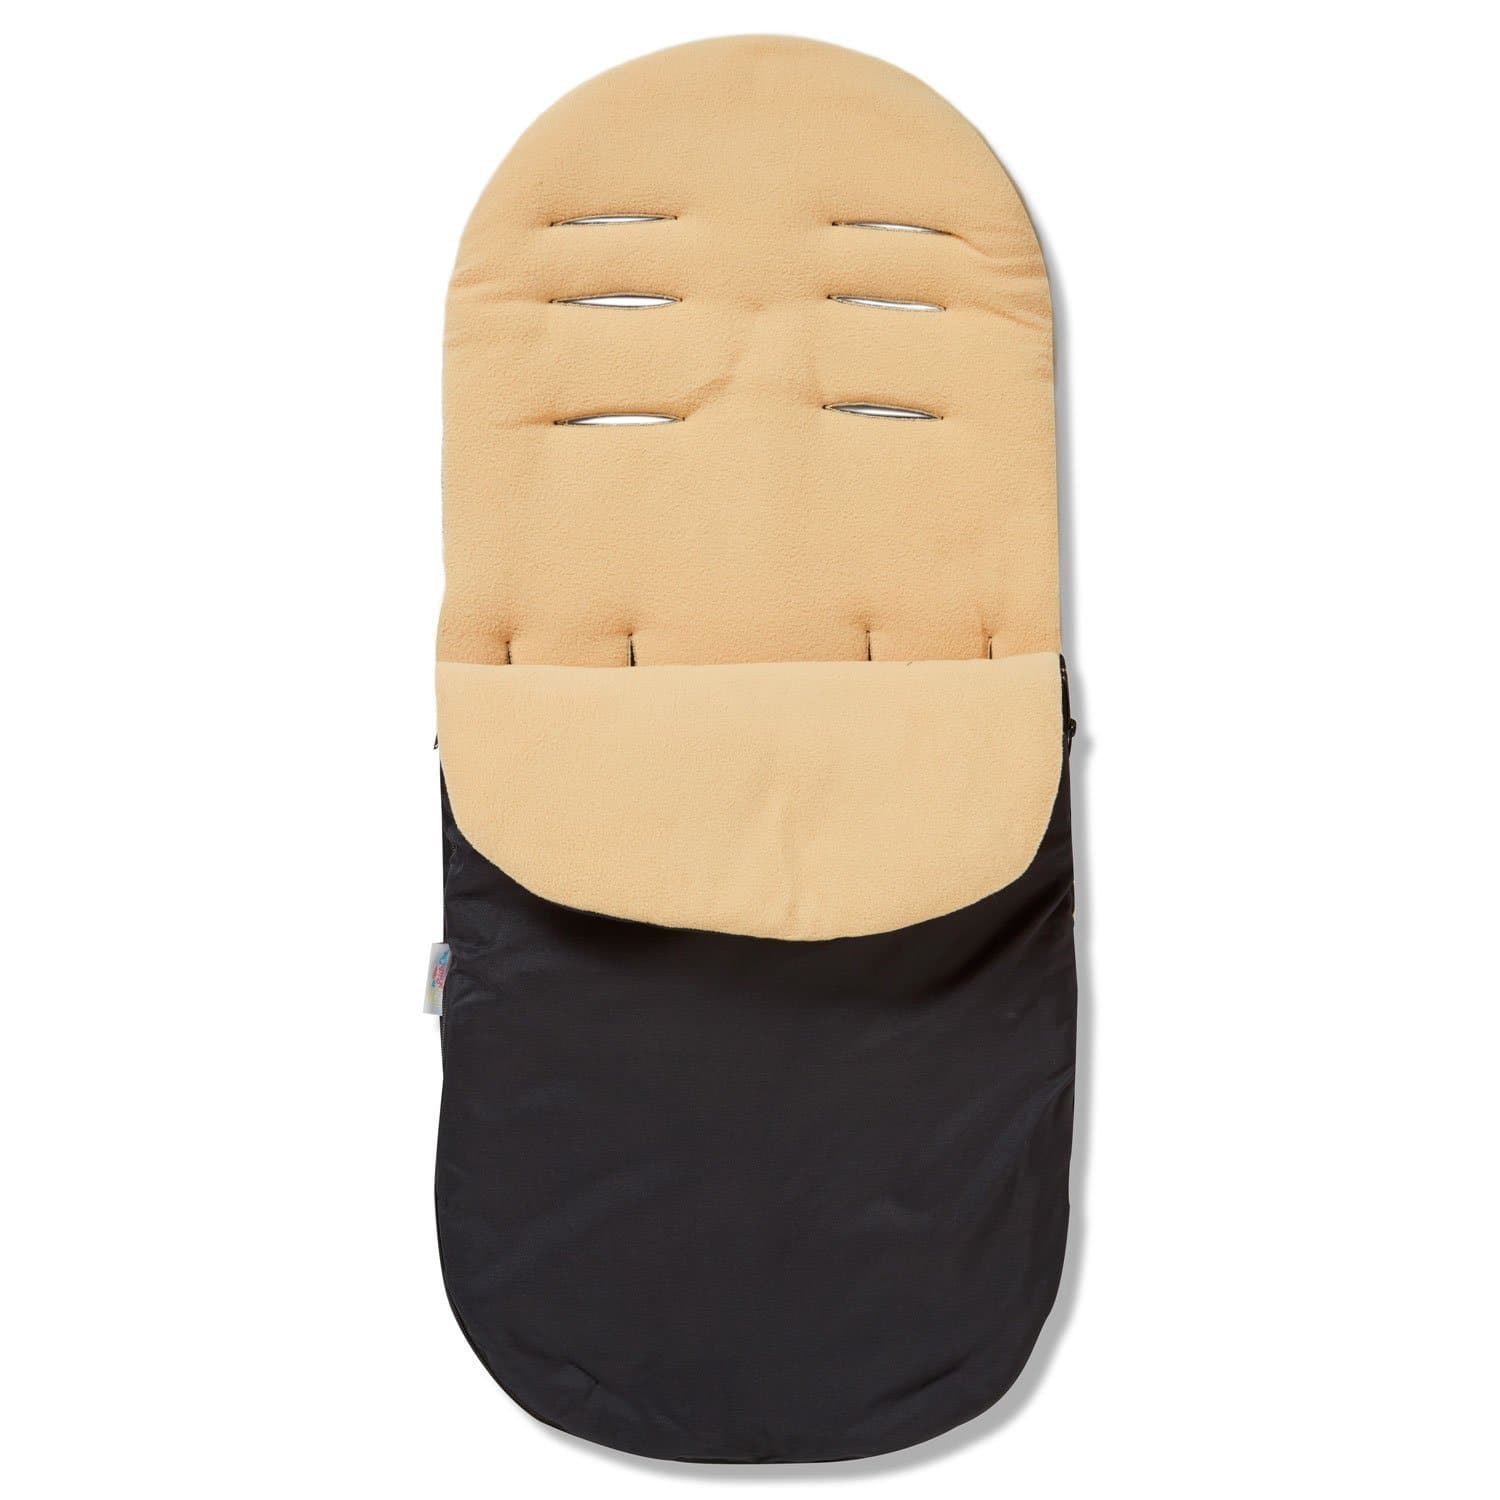 Footmuff / Cosy Toes Compatible with Babywelt - Sand / Fits All Models | For Your Little One